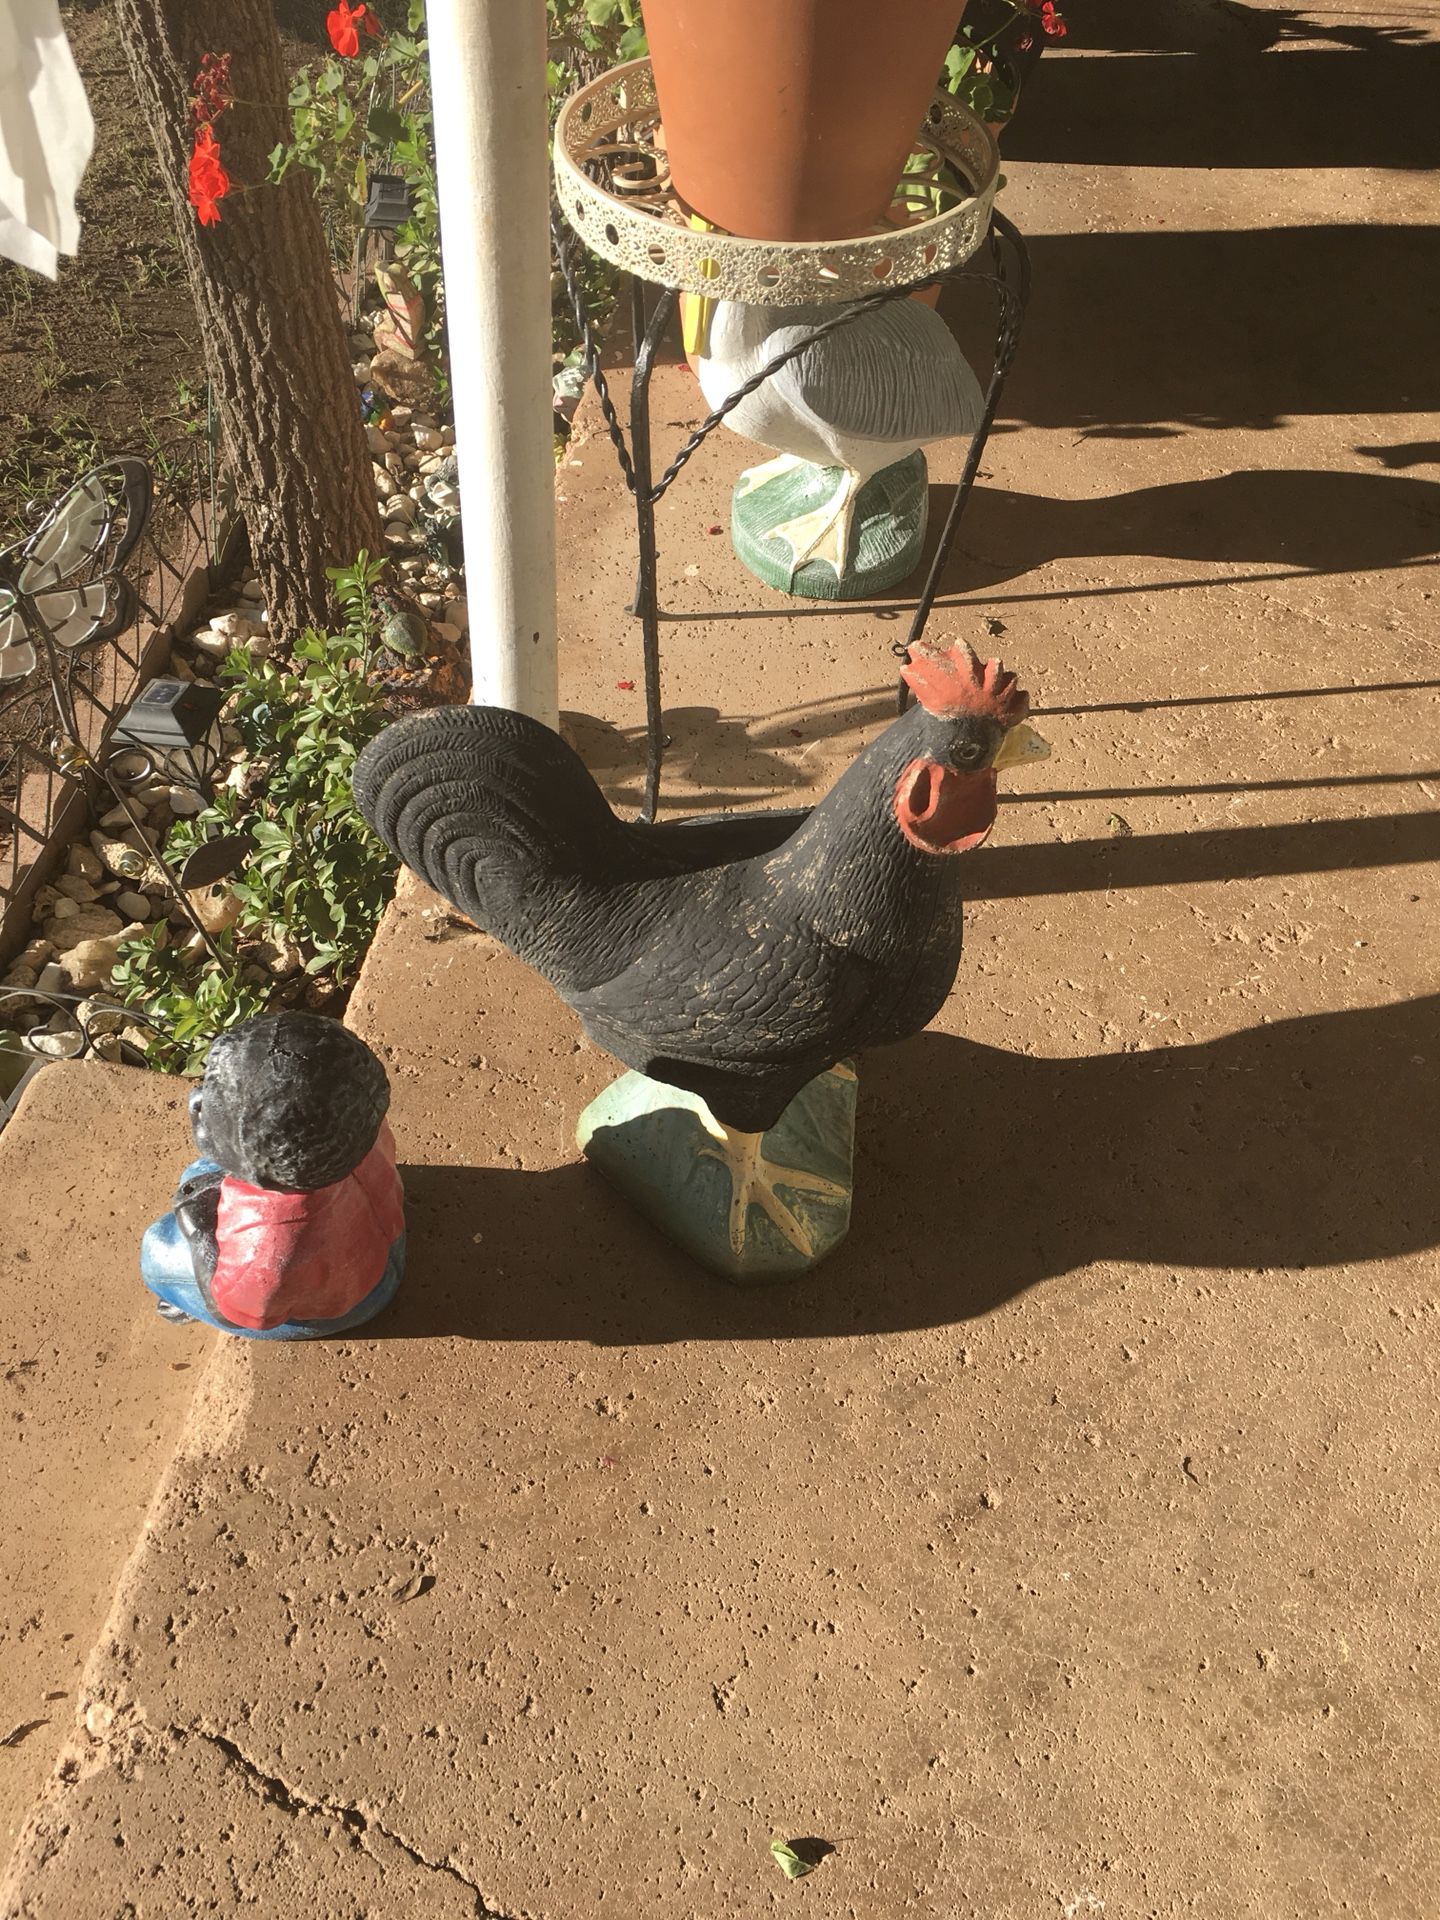 Concrete rooster